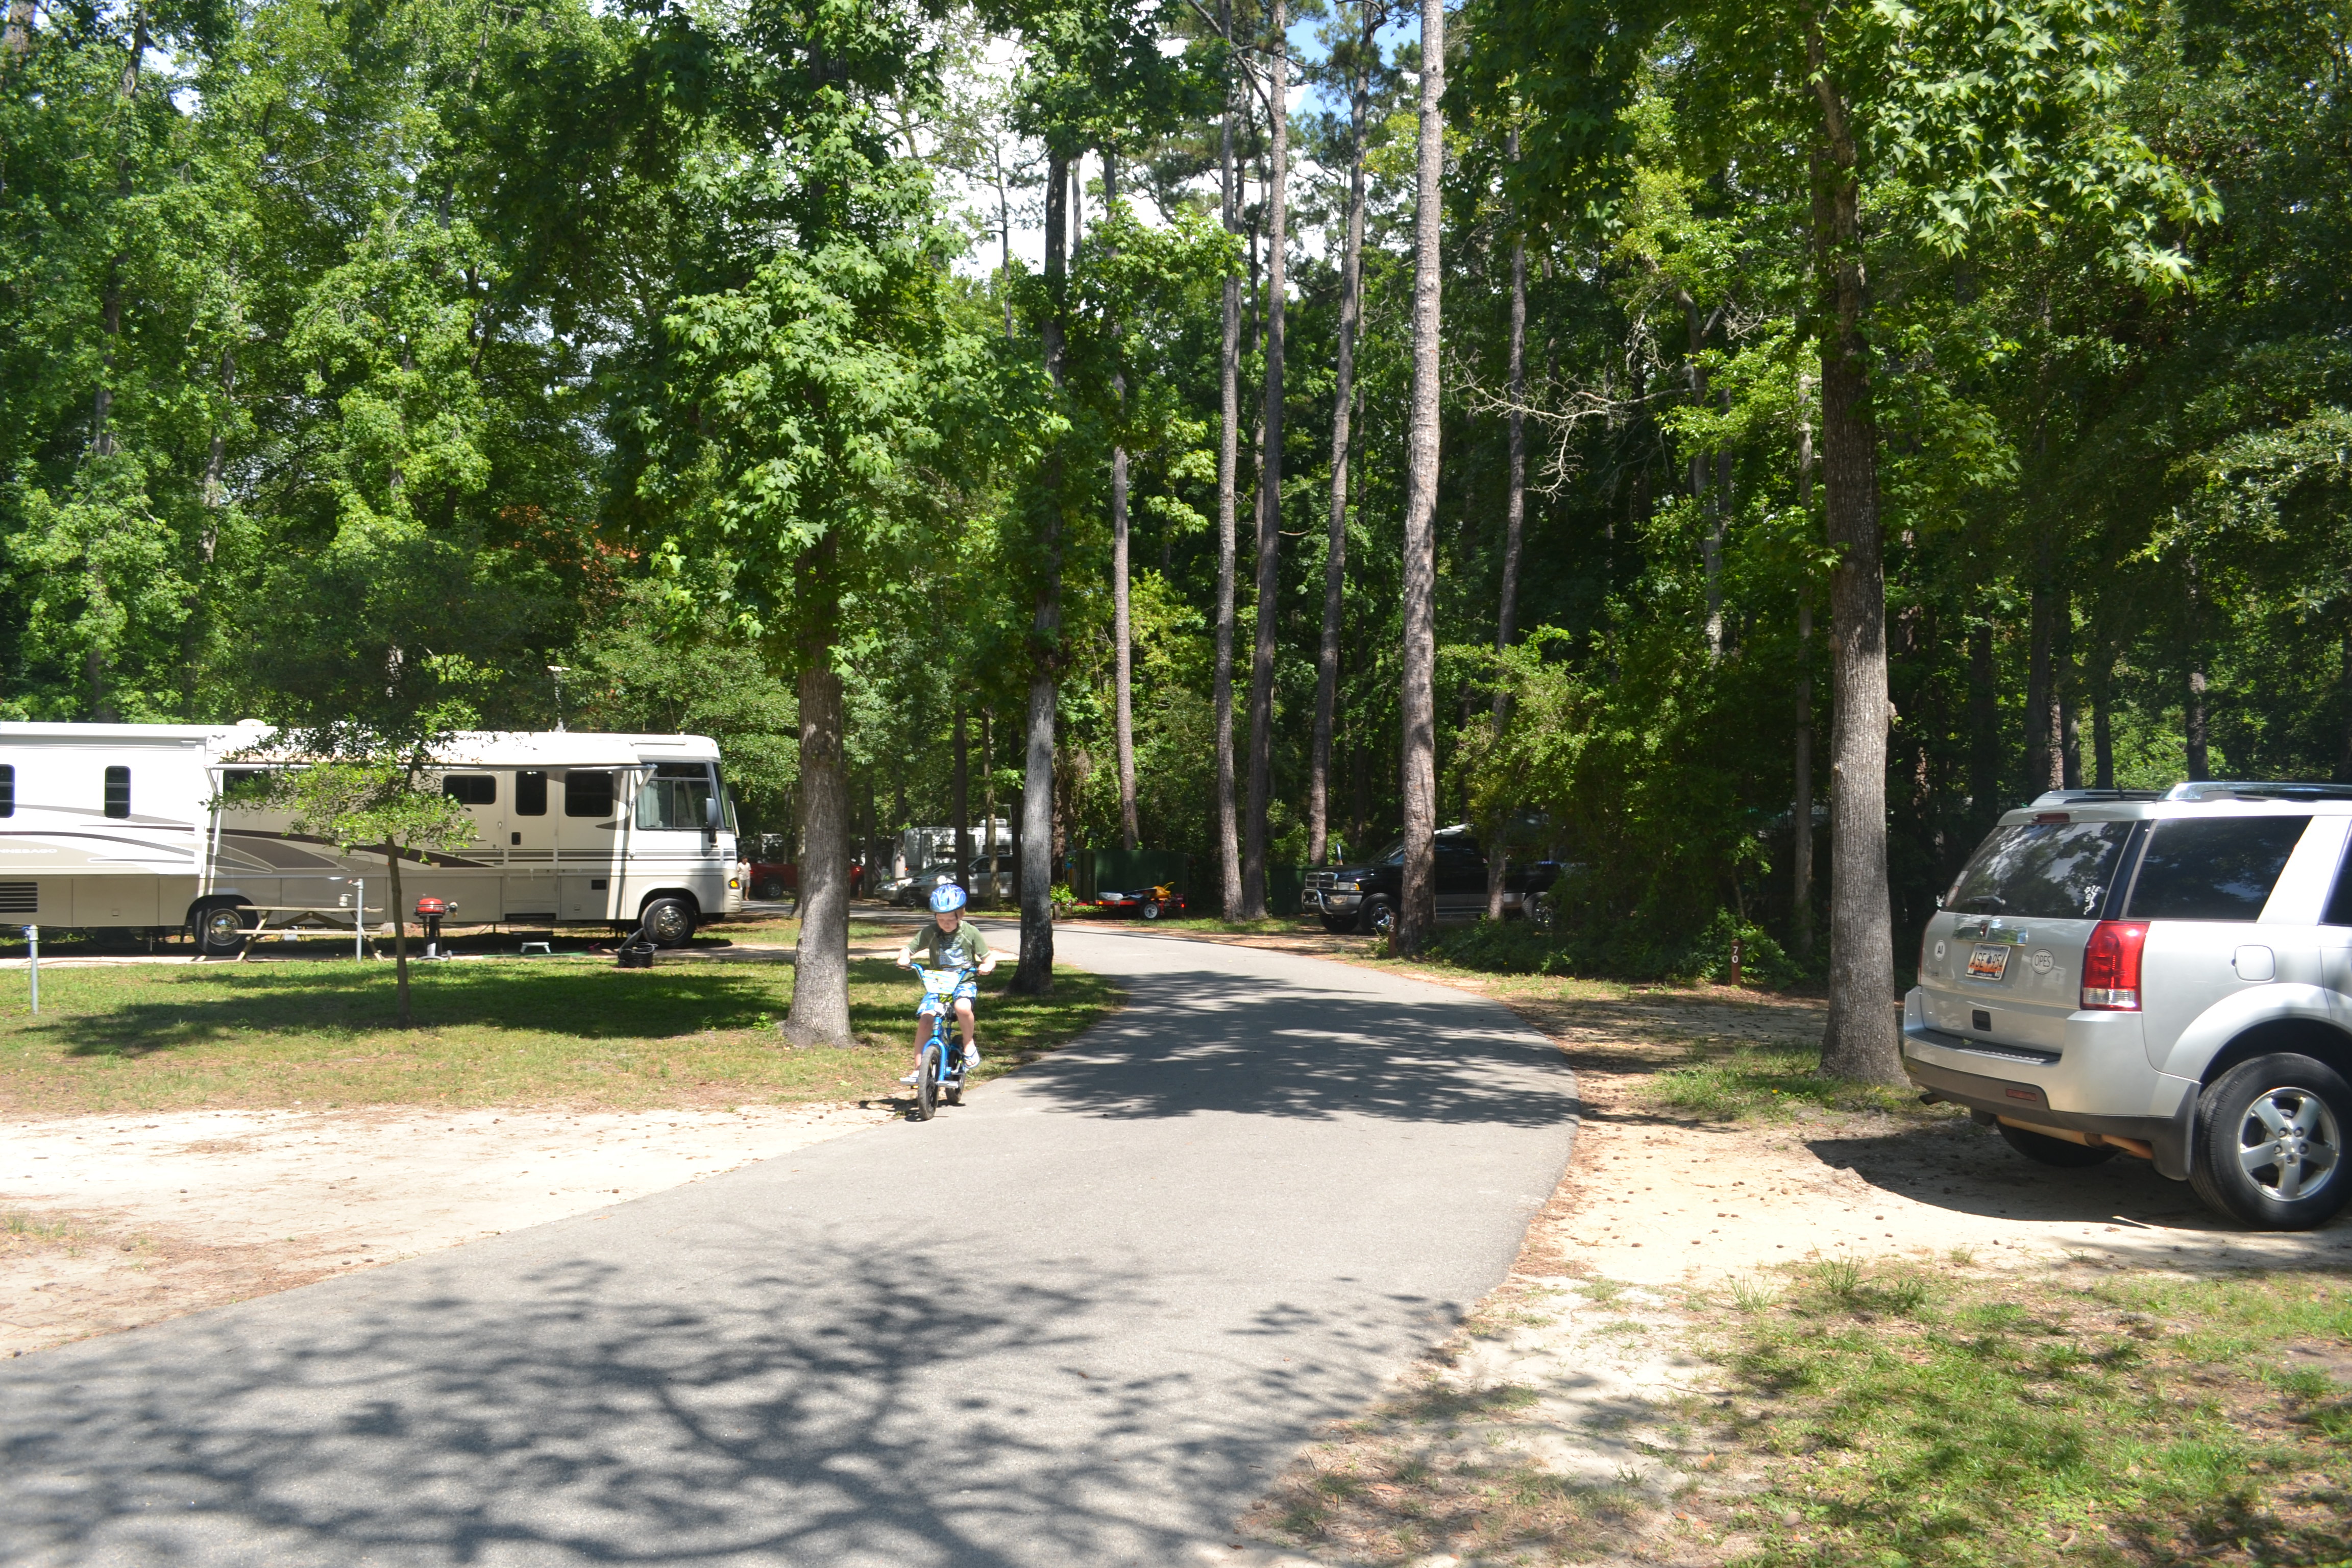 myrtle beach state park campground reviews